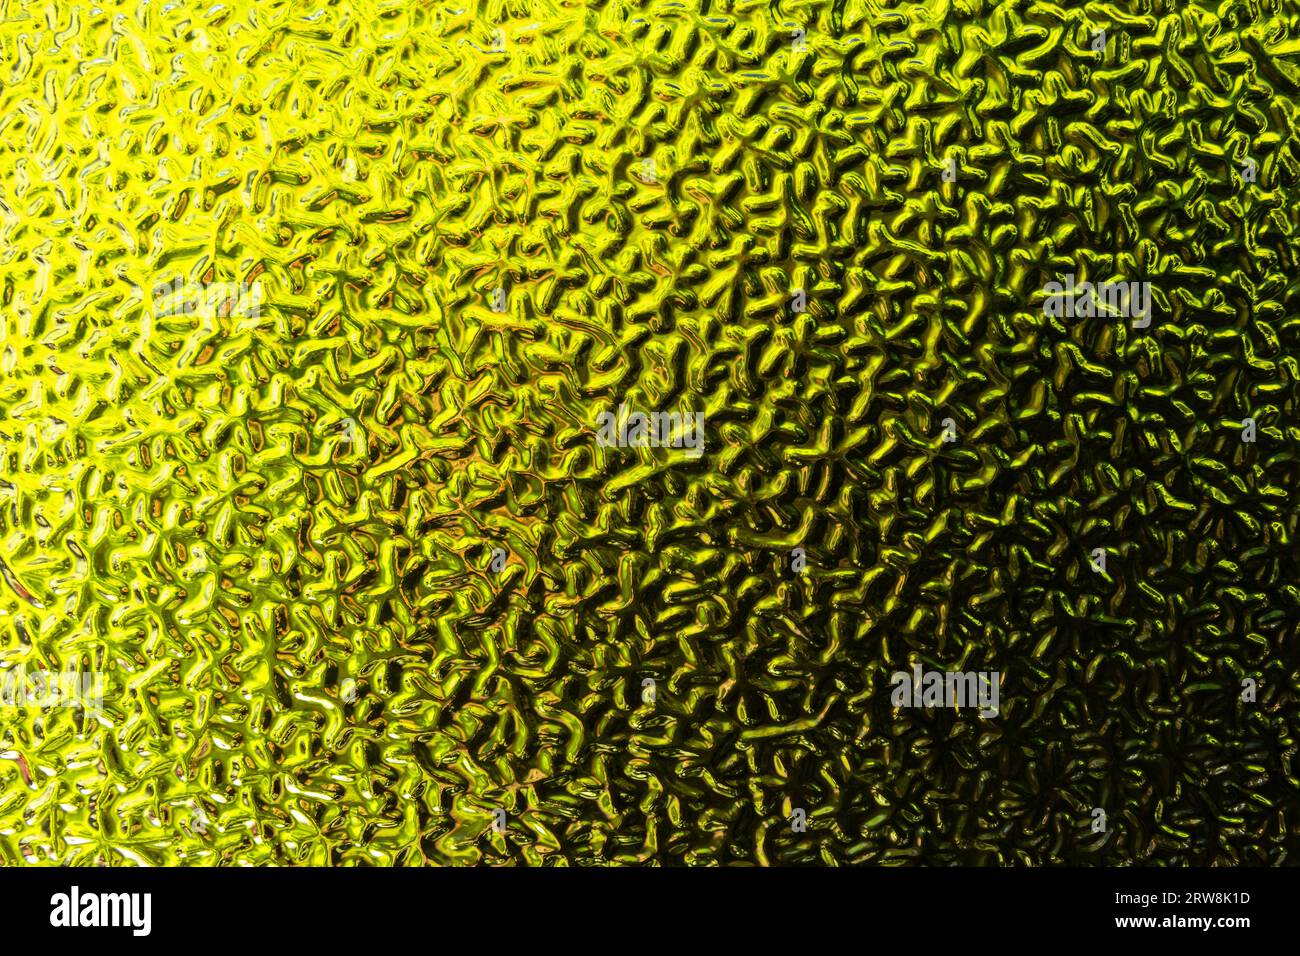 Close-up abstraction of textured green and yellow window glass. Stock Photo